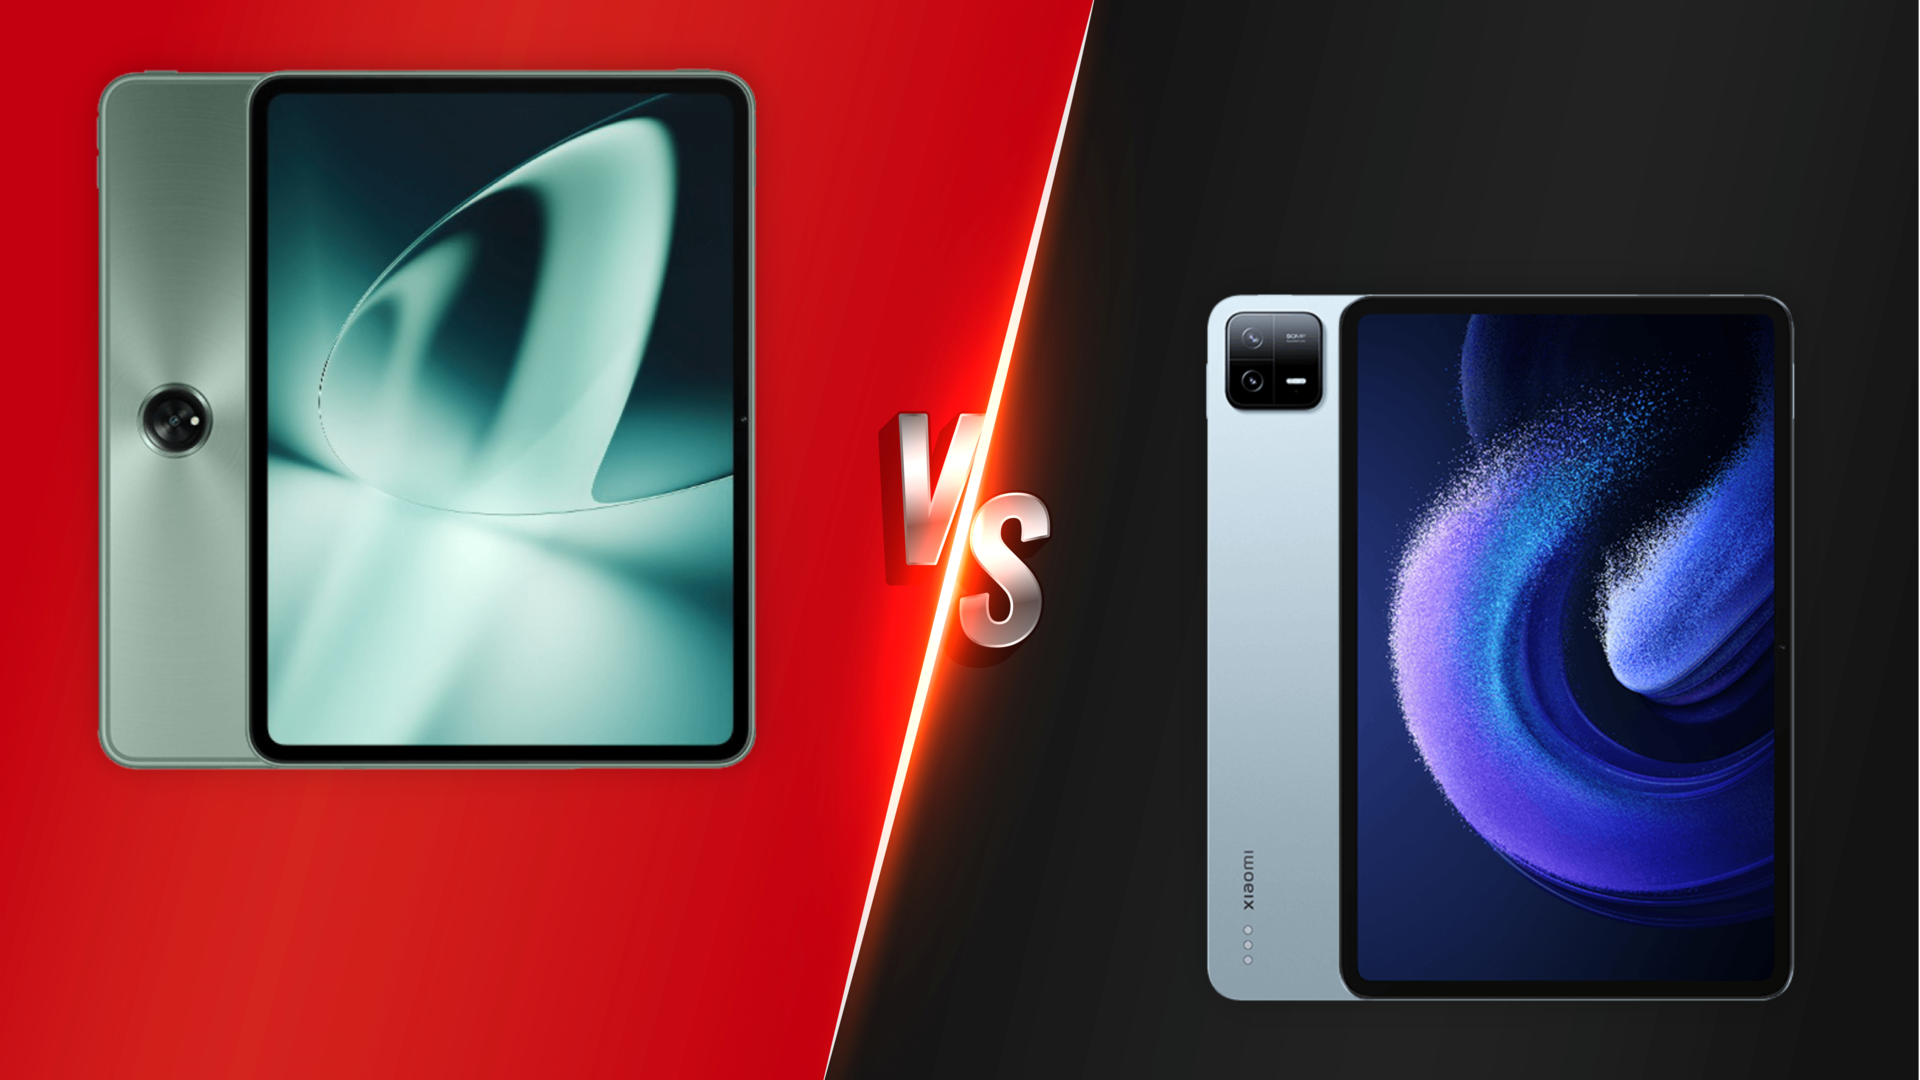 OnePlus Pad v/s Xiaomi Pad 6 Pro: Which is better